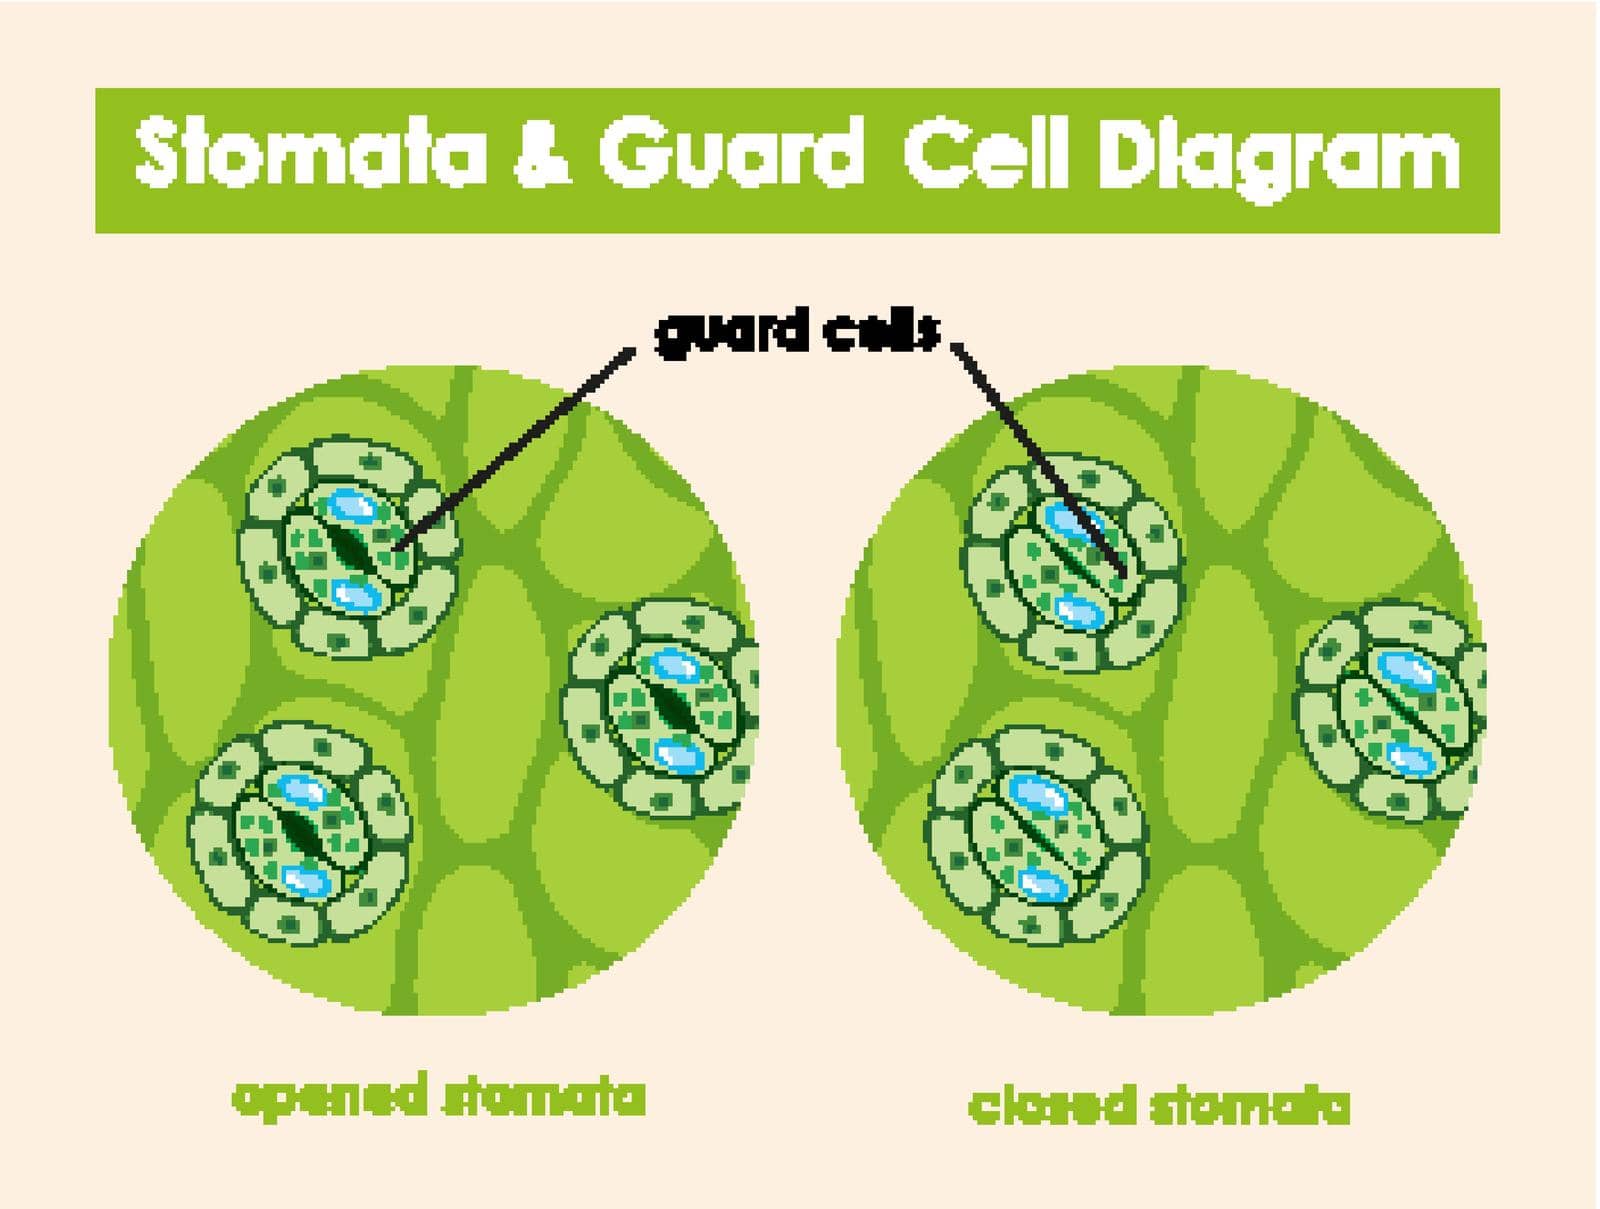 Diagram showing stomata and guard cell illustration